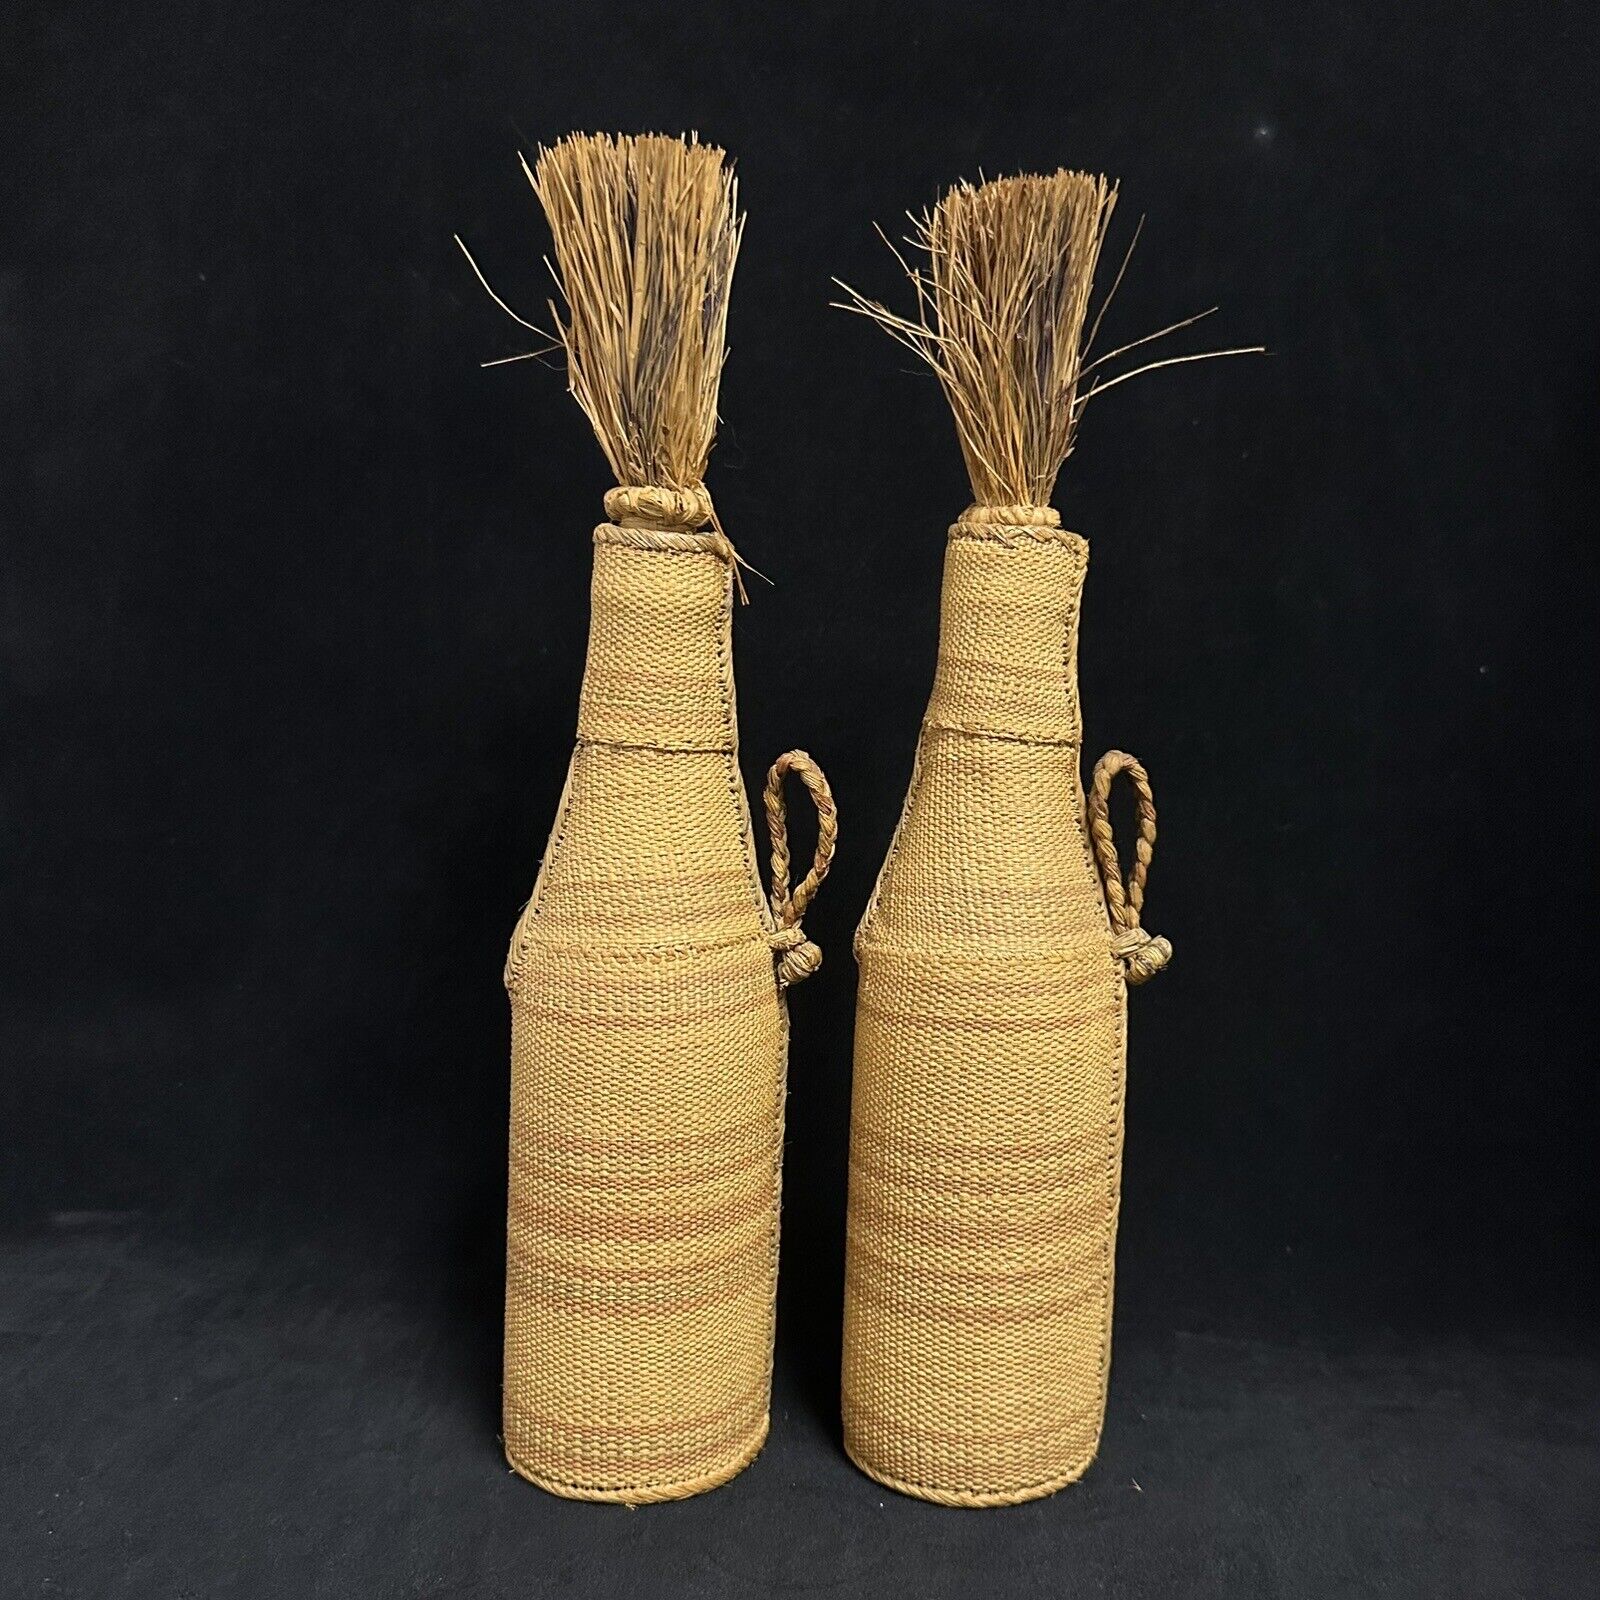 Pair Of Finely Woven Twined Basketry Covered Bottles & Stoppers